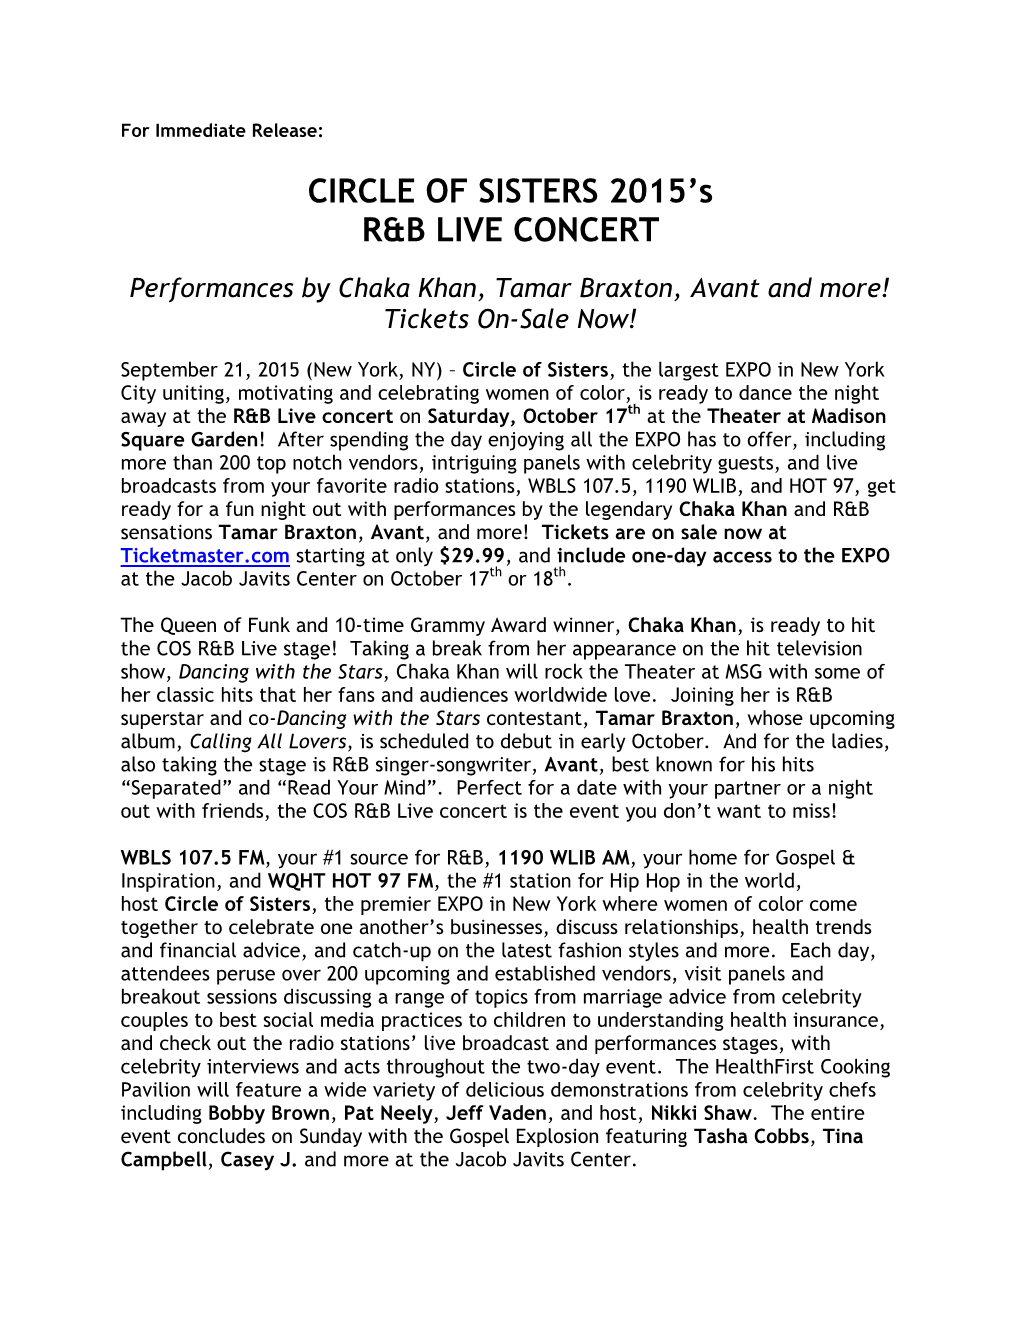 CIRCLE of SISTERS 2015'S R&B LIVE CONCERT